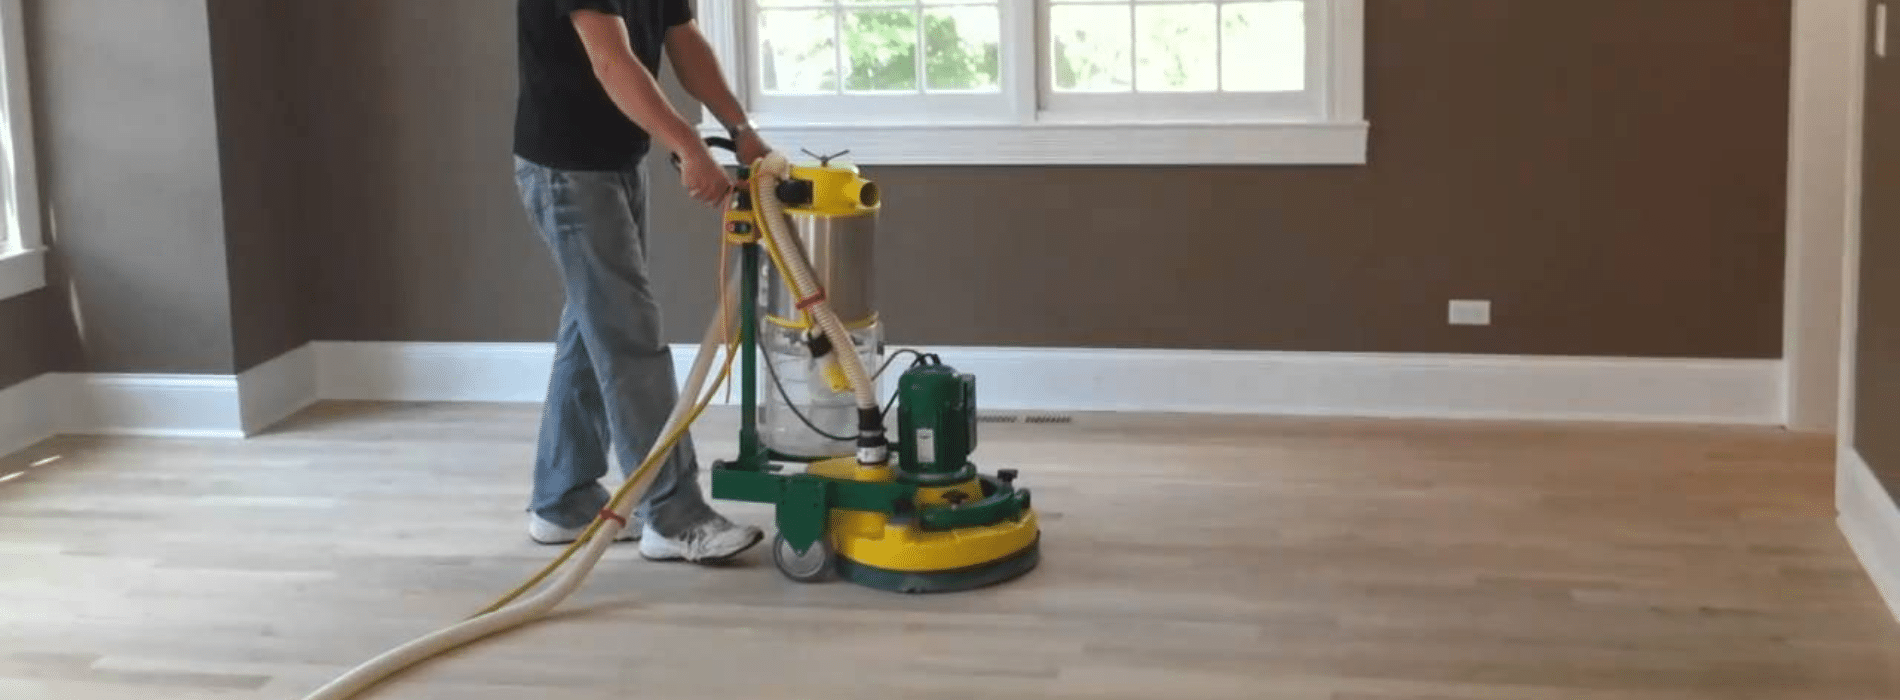 Mr Sander® utilizing the high-performance Effect 2200 belt sander for precision. Voltage: 230V, Frequency: 50-60Hz. Witness the clean and efficient results on a 250x750 mm herringbone floor with the HEPA-filtered dust extraction system.